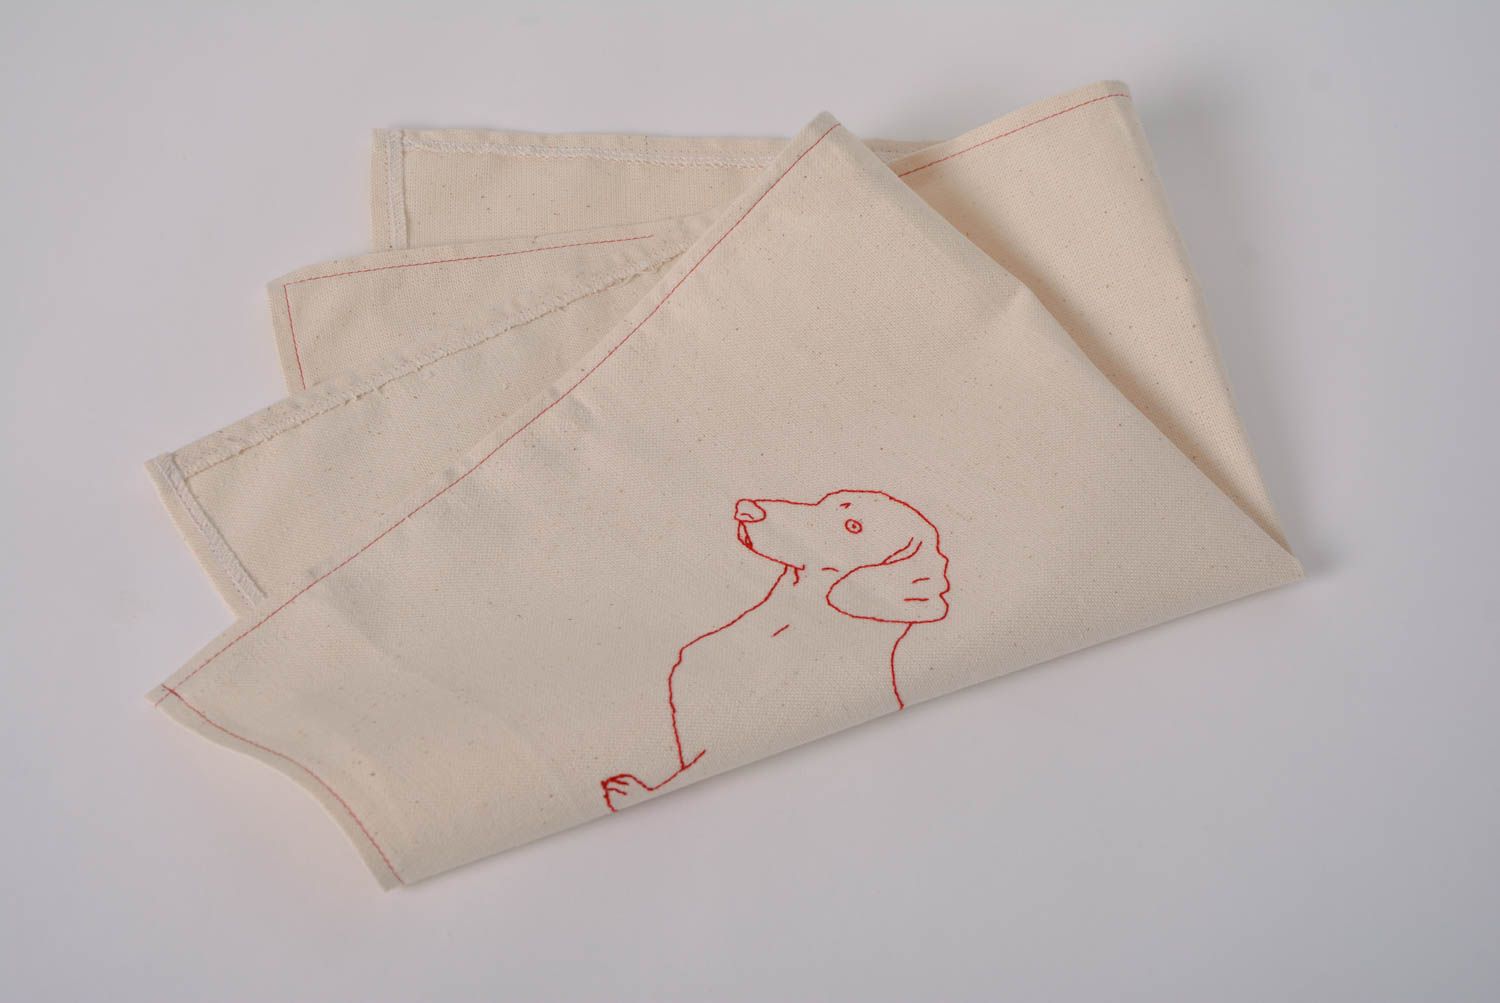 Handmade designer fabric dish towel with cute embroidered badger dog photo 4